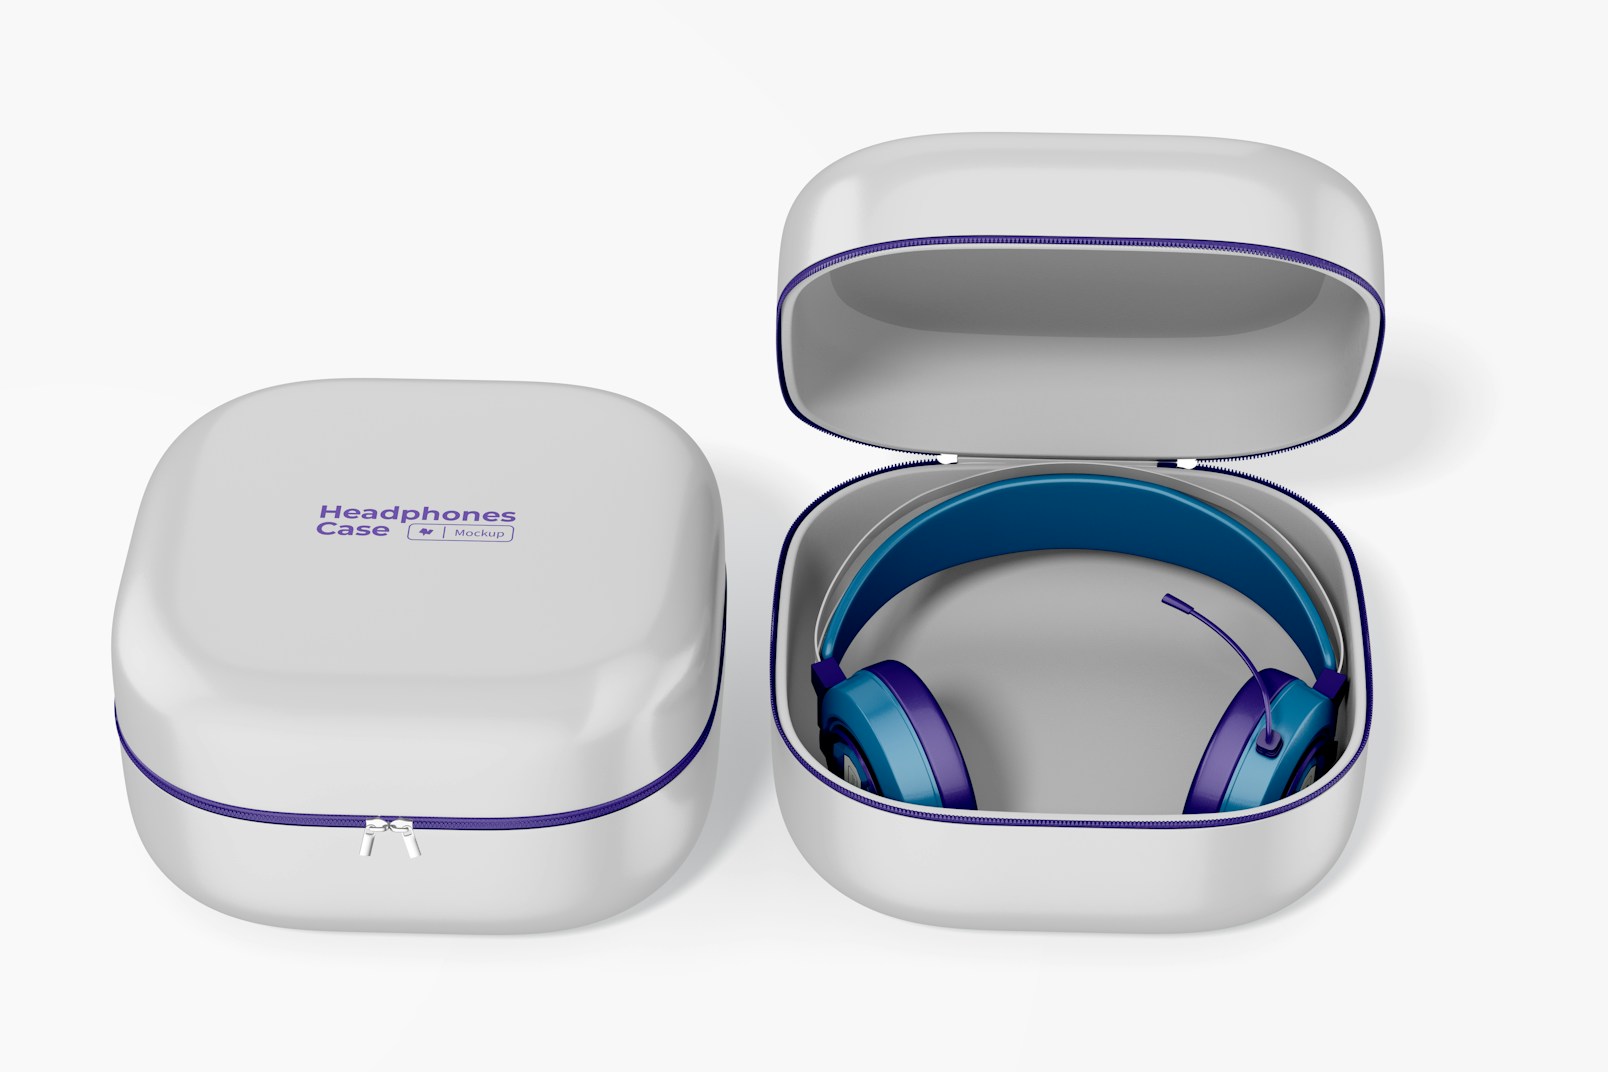 Headphones with Case Mockup, Opened and Closed